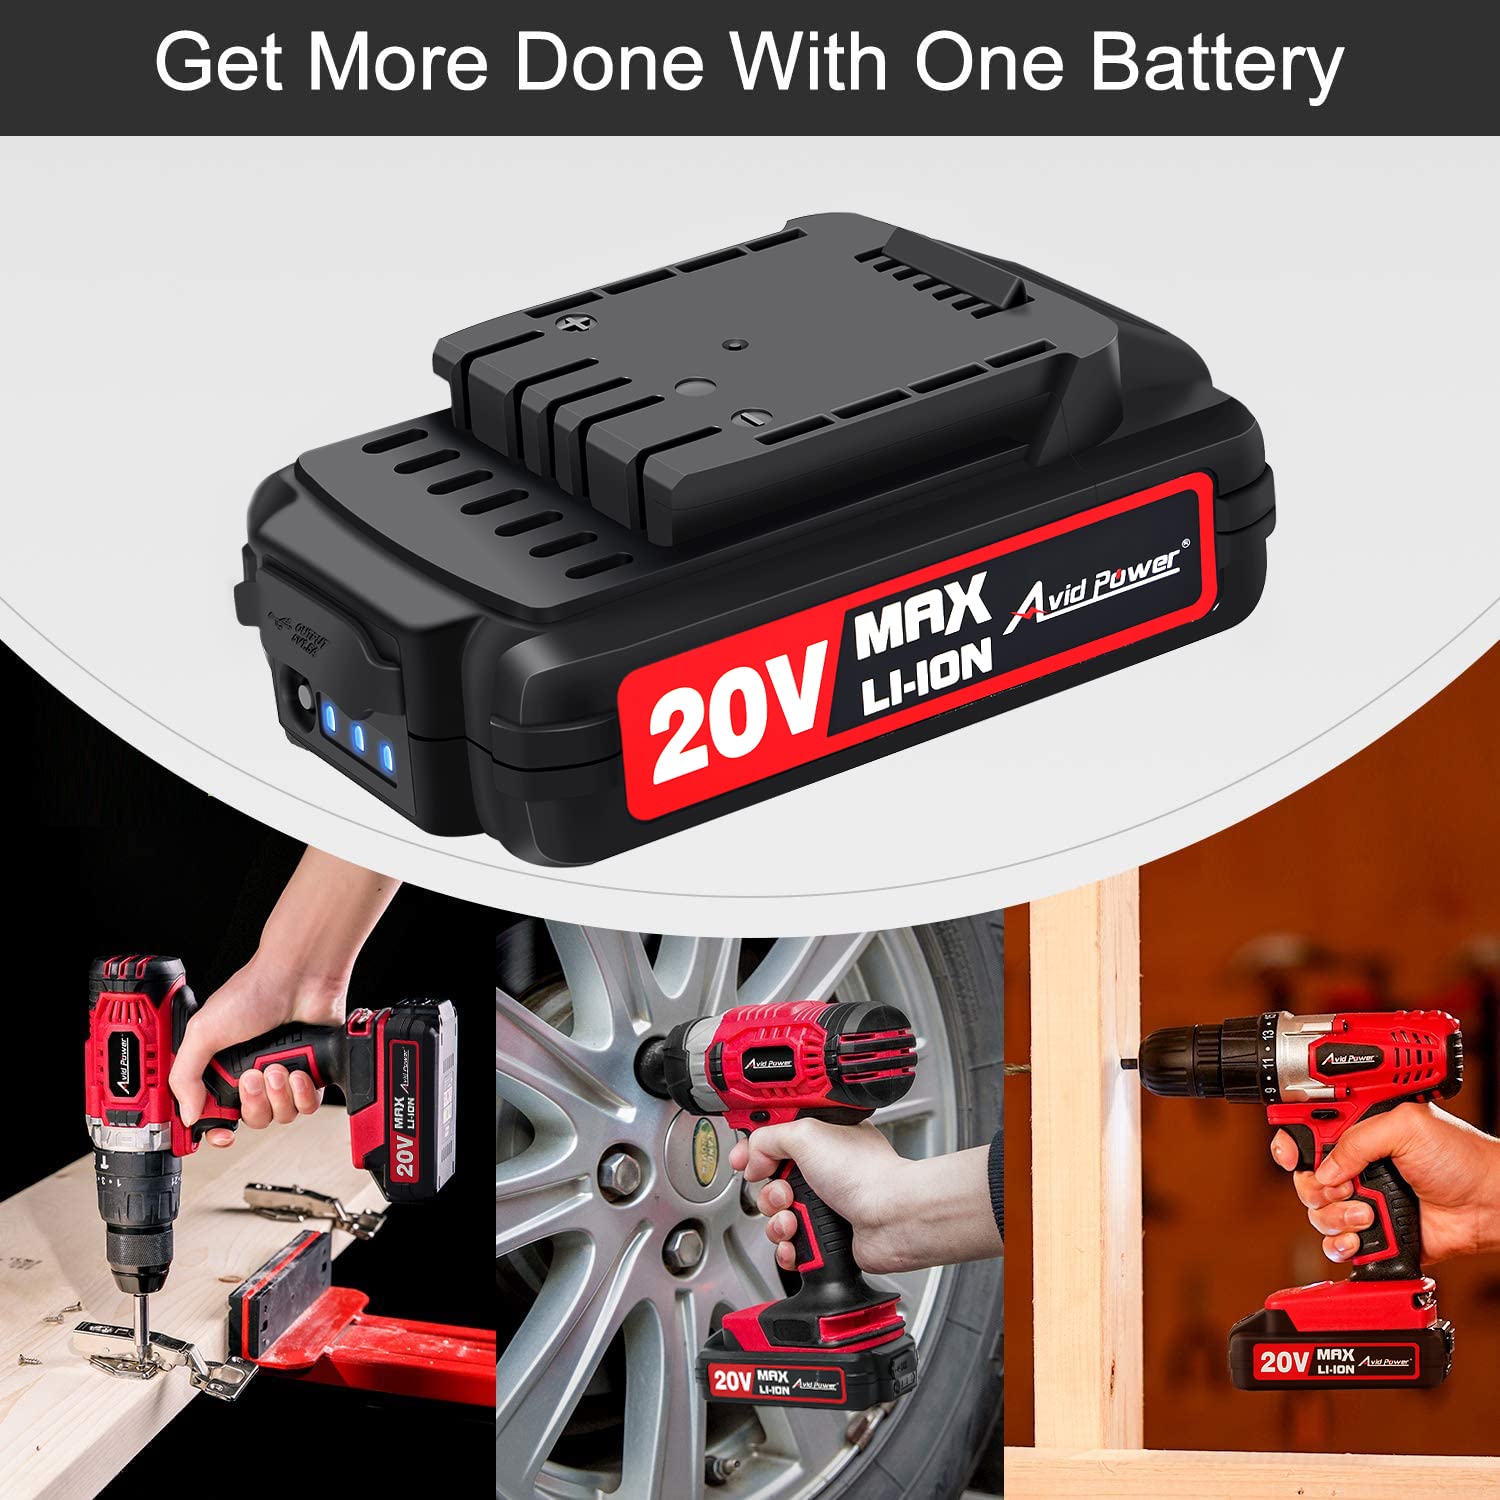 AVID POWER 20V MAX Lithium lon Cordless Drill Set Bundle with 20V MAX Lithium Ion Rechargeable Battery